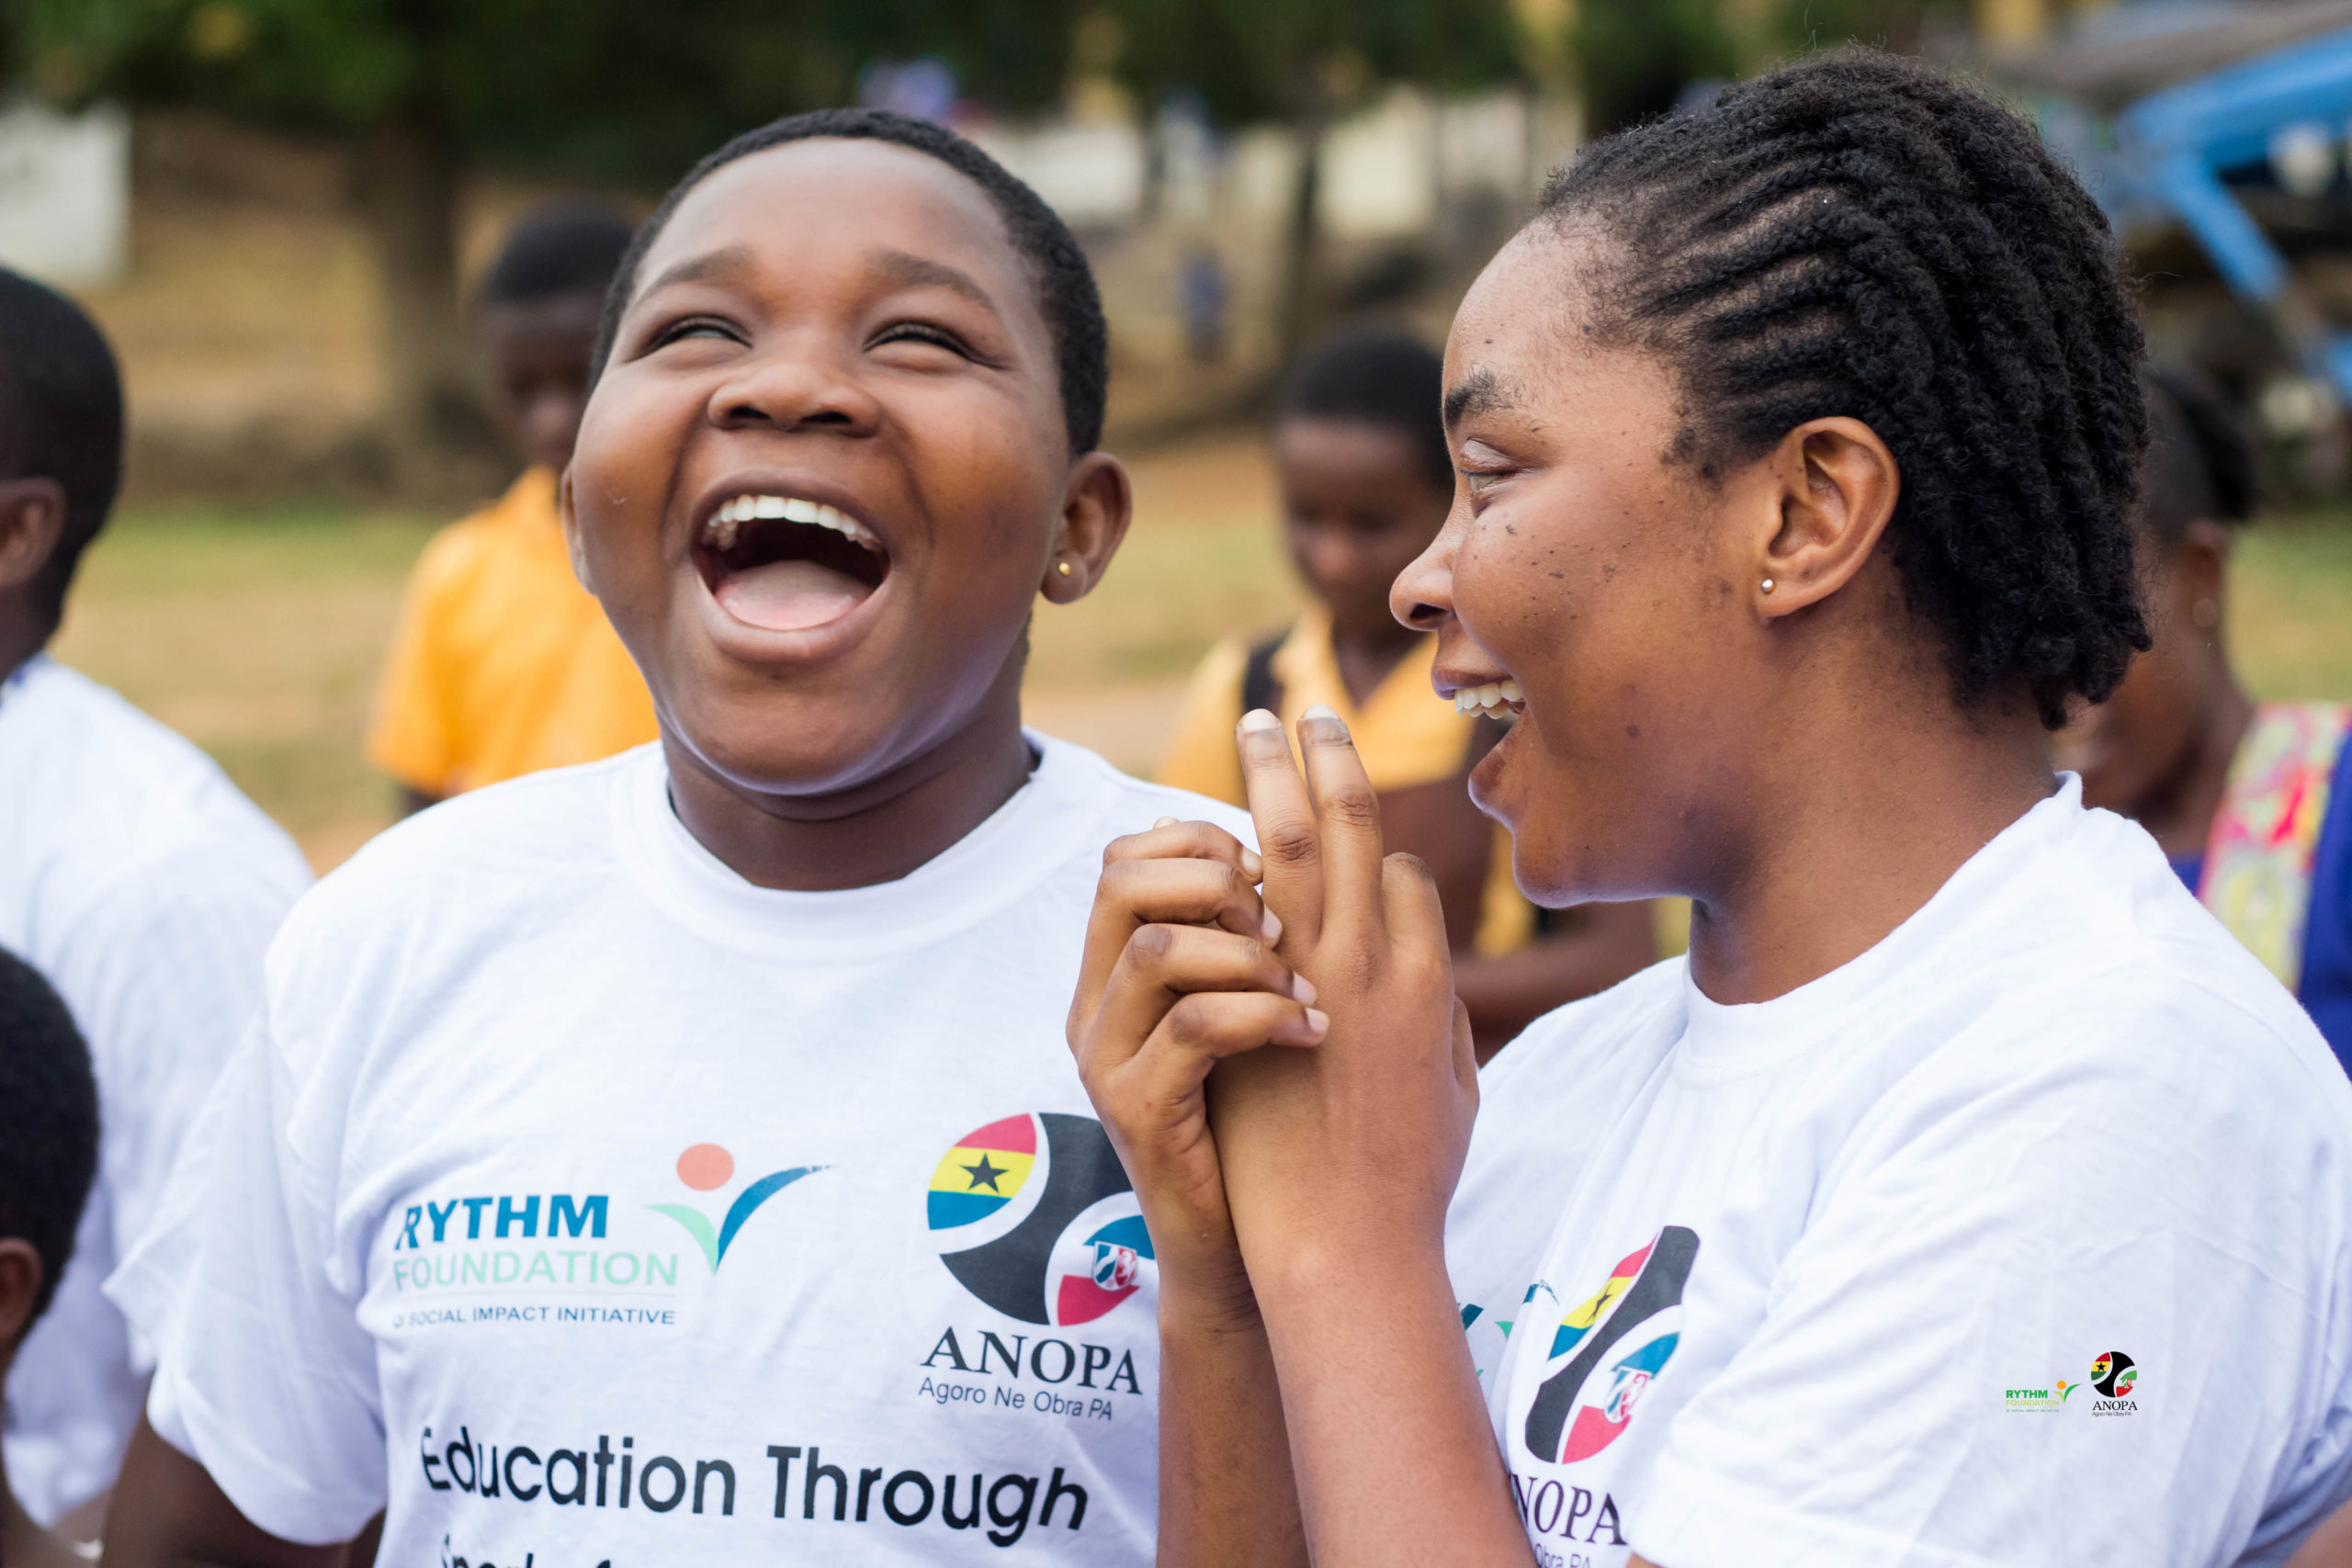 RYTHM Foundation joins hands with ANOPA Project to keep visual and hearing impaired Ghanaian youth in school